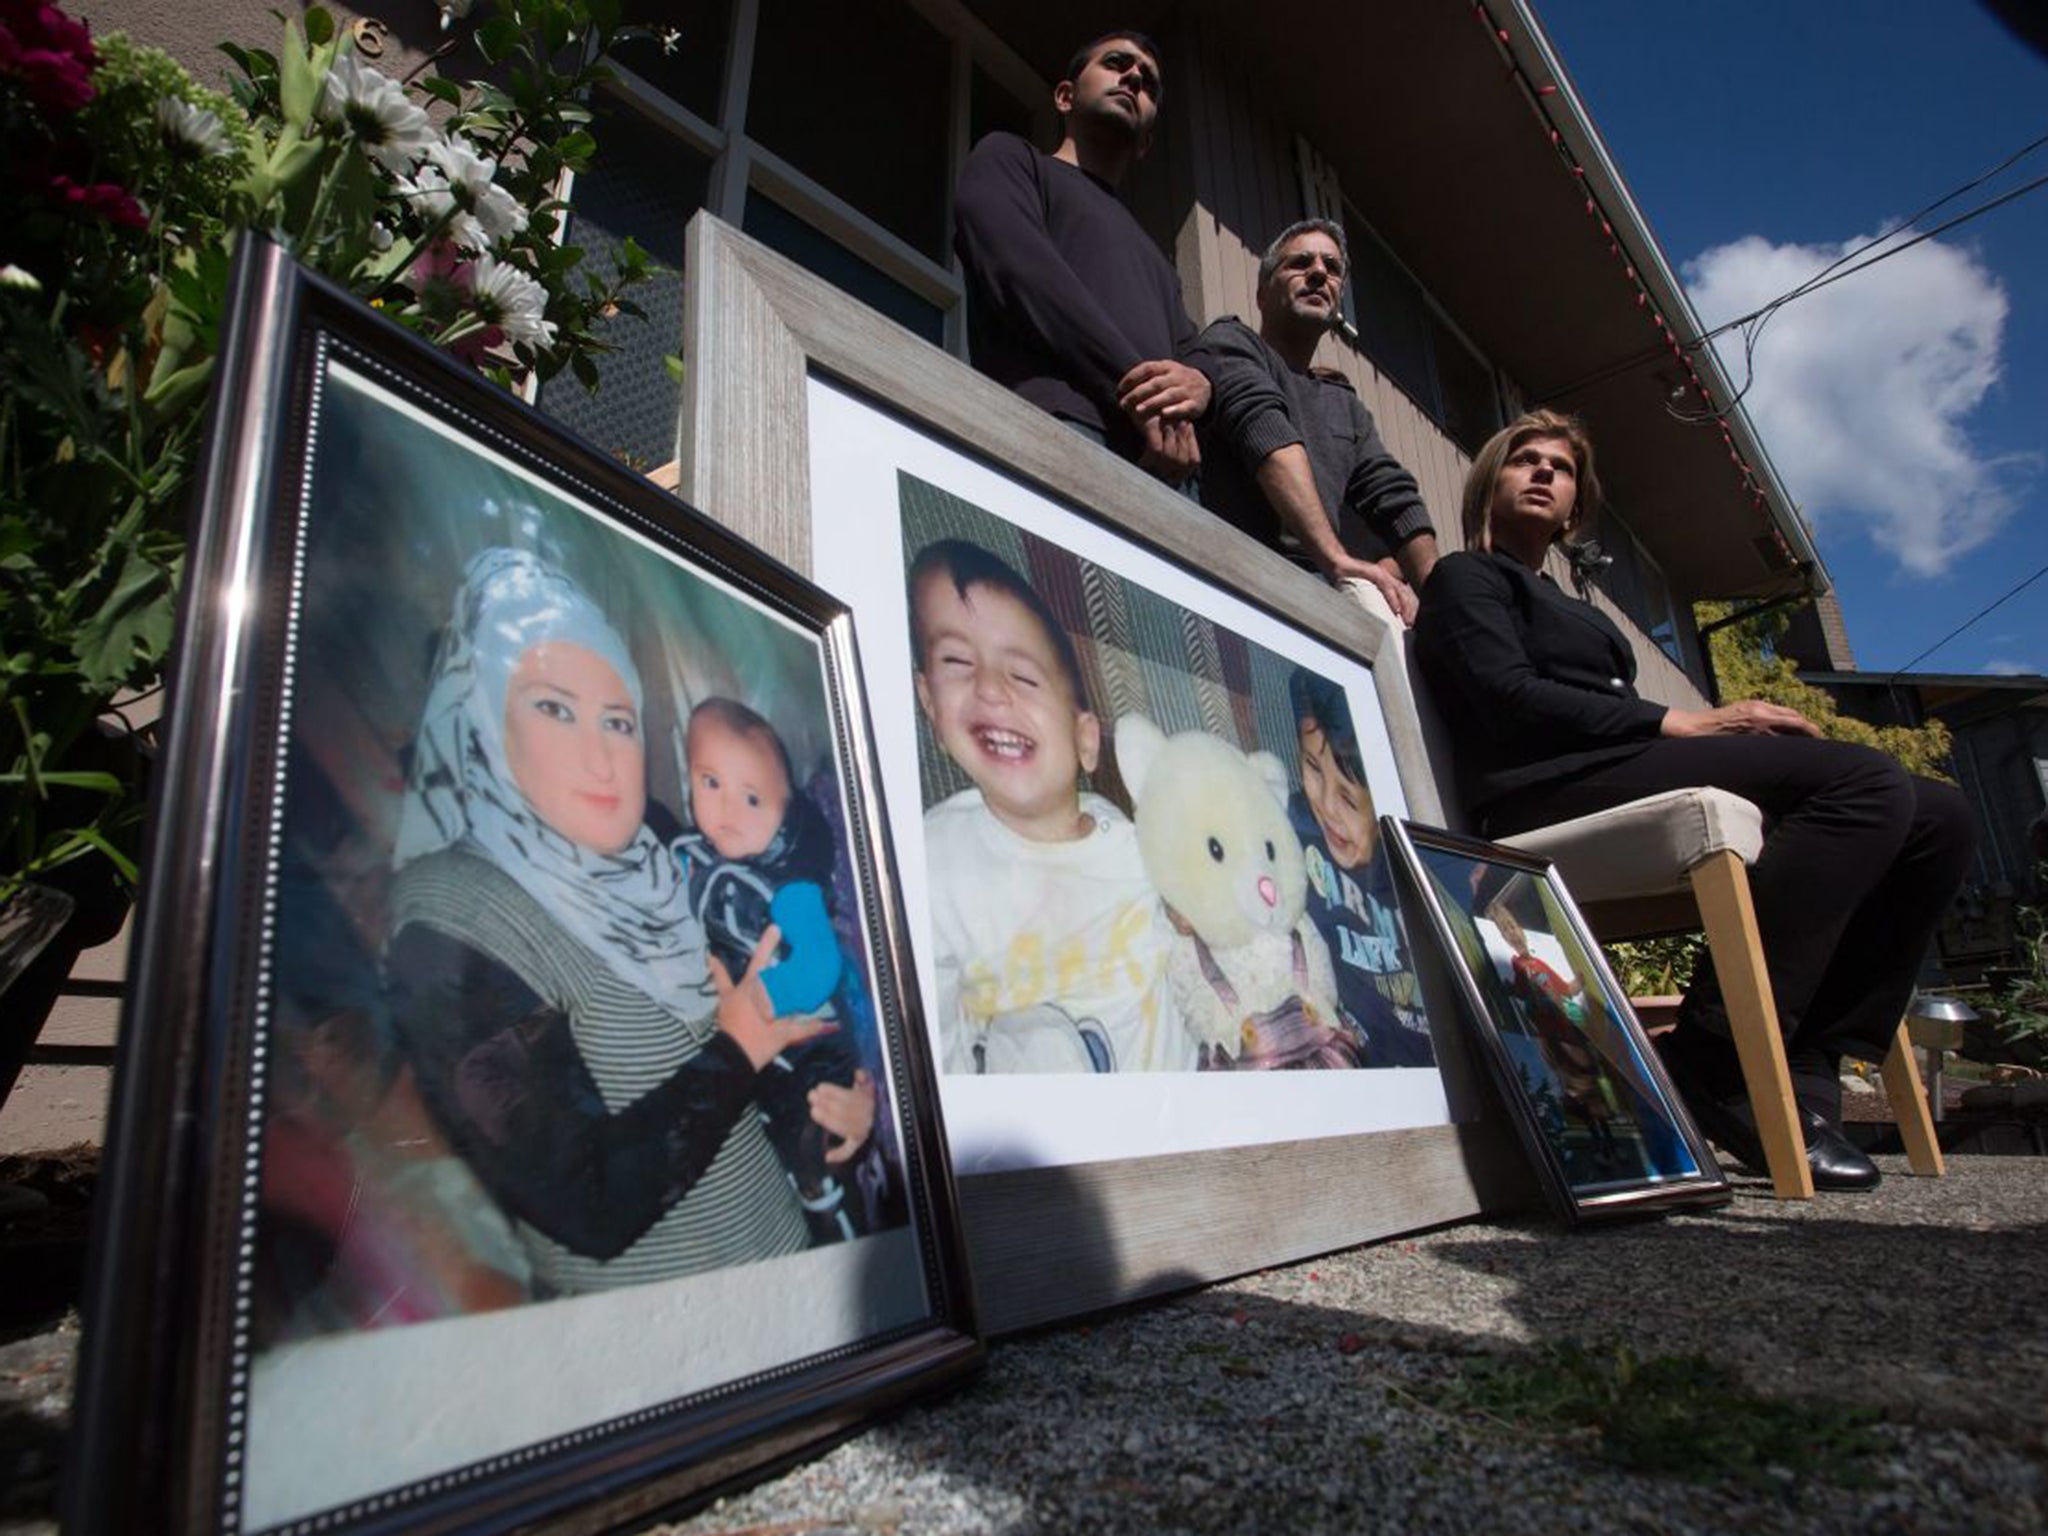 Pictures of Alan Kurdi in front of his aunt's home in Canada